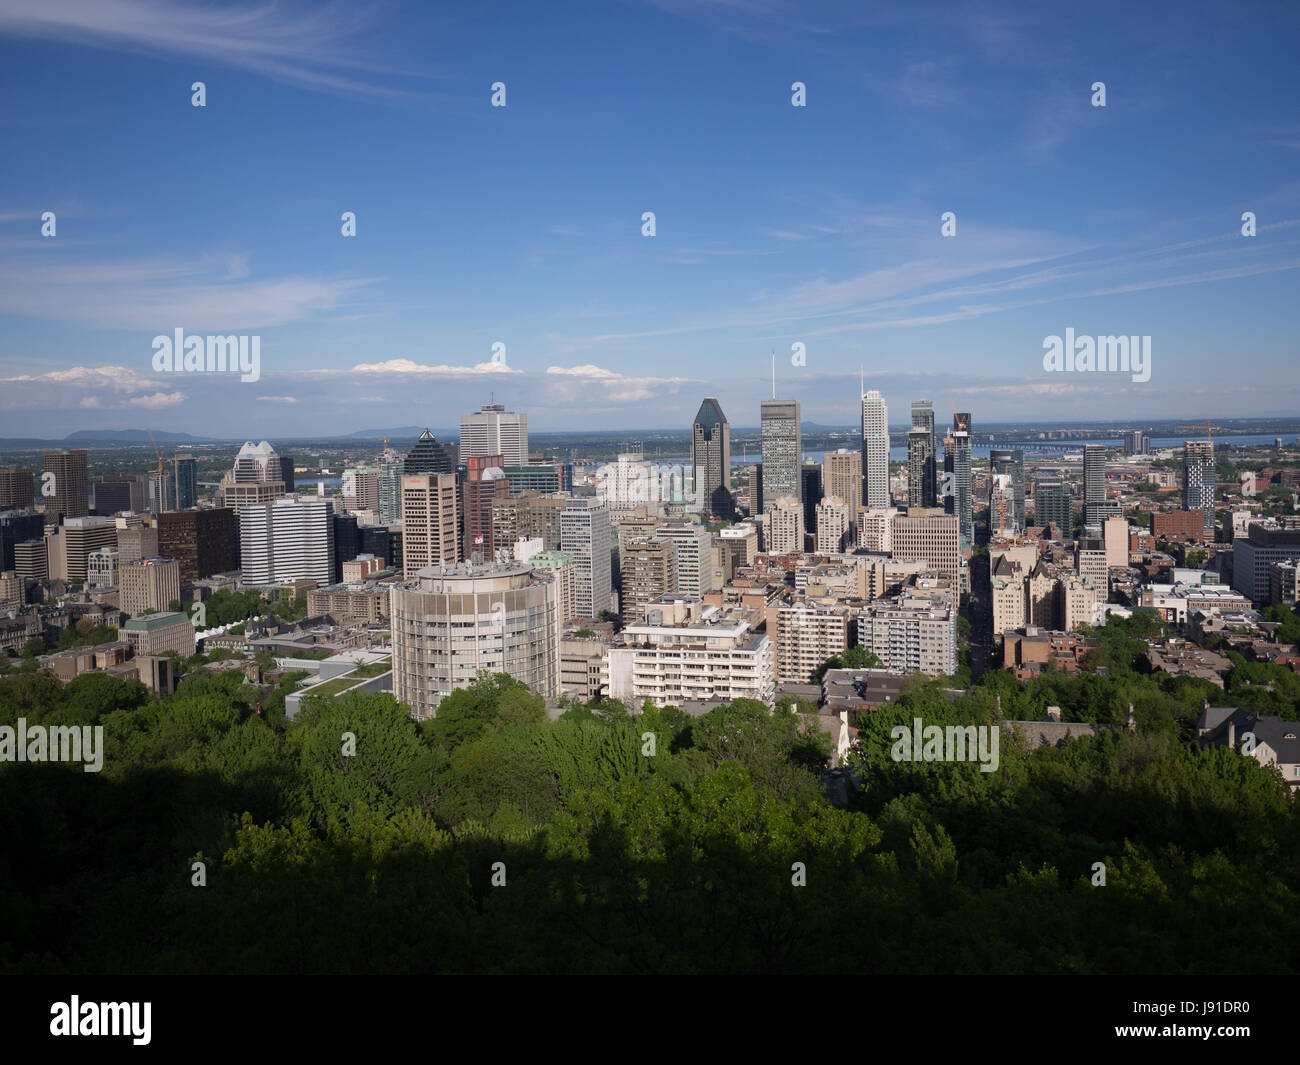 Montreal skyline during the day as viewed from Mount Royal Overlook. The summer time and clear blue skies add weight to an impressive Canadian Skyline Stock Photo